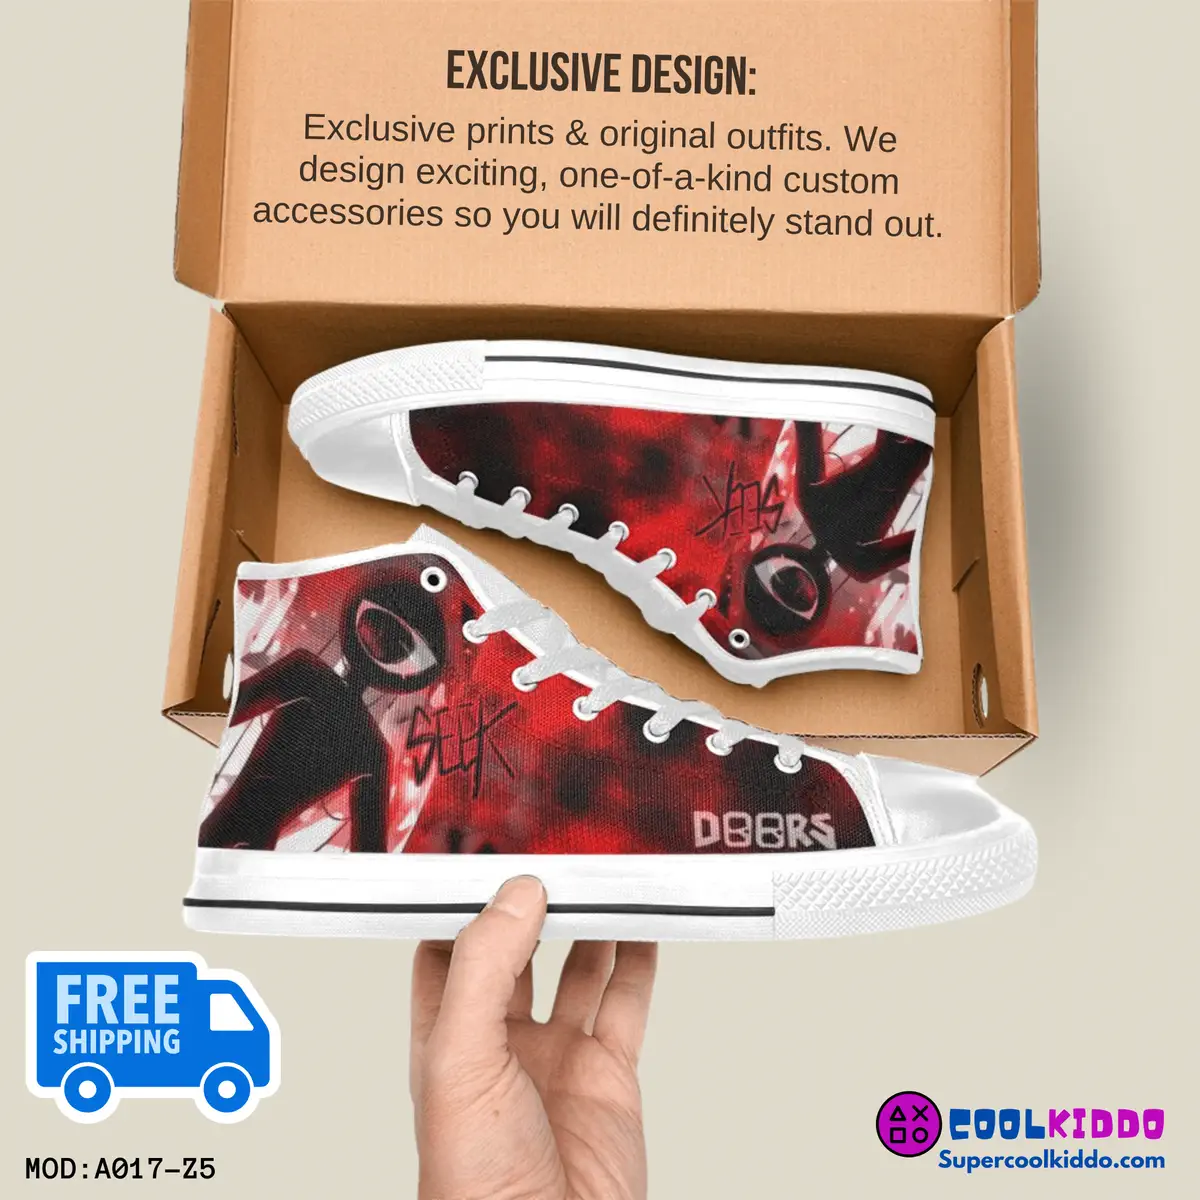 Roblox Doors Inspired High Top Shoes for Kids/Youth – “Seek” Character Print. High-Top Sneakers Cool Kiddo 22